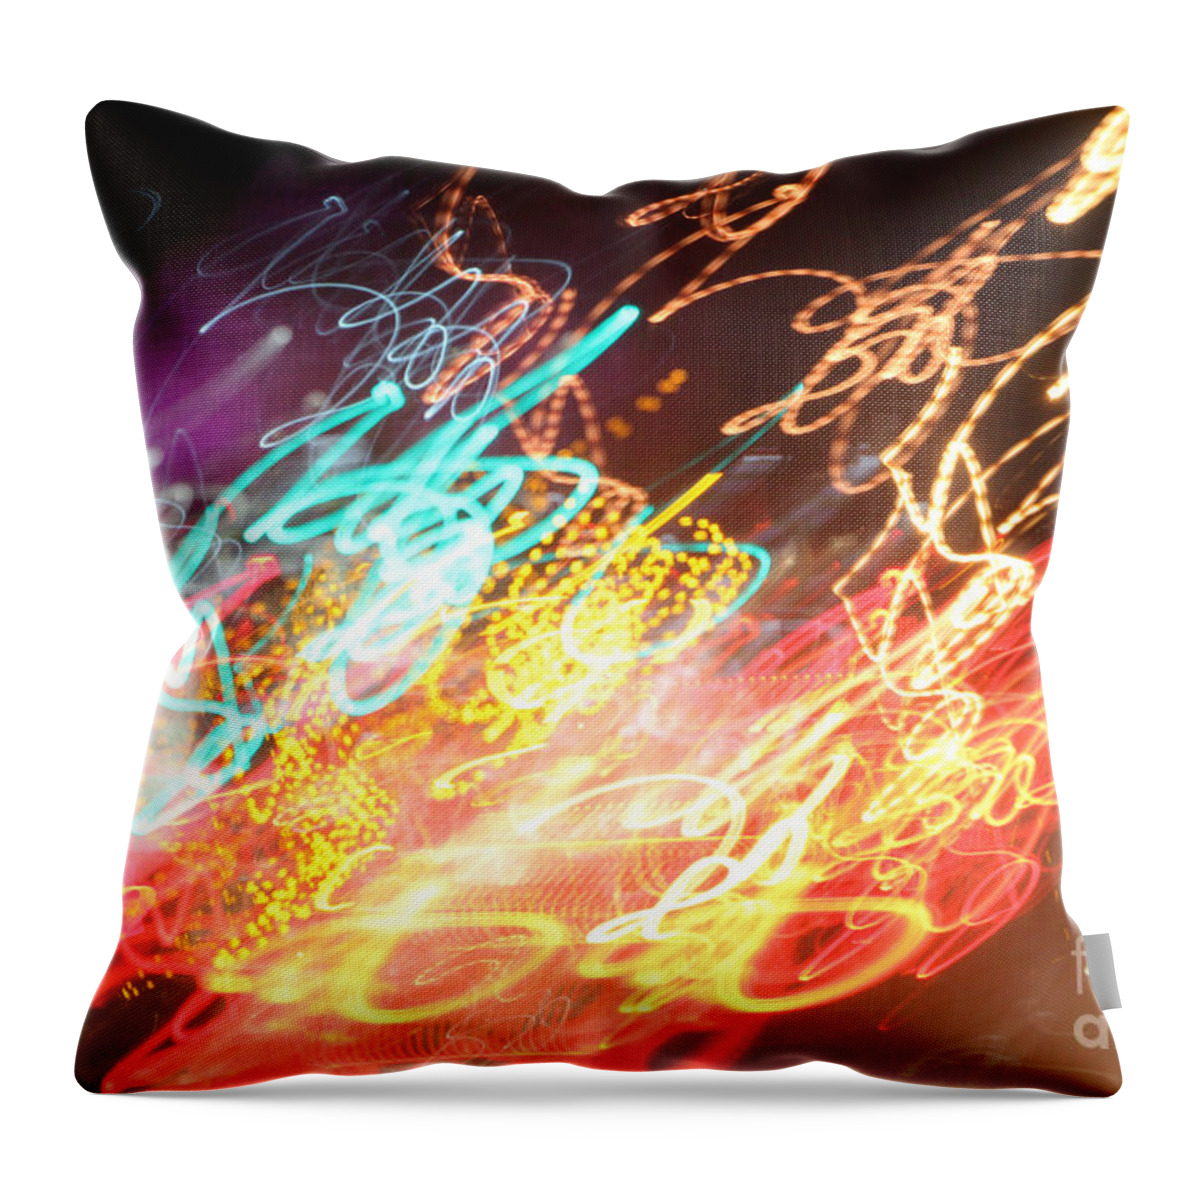 Neon Throw Pillow featuring the photograph Street Art by Creative Solutions RipdNTorn